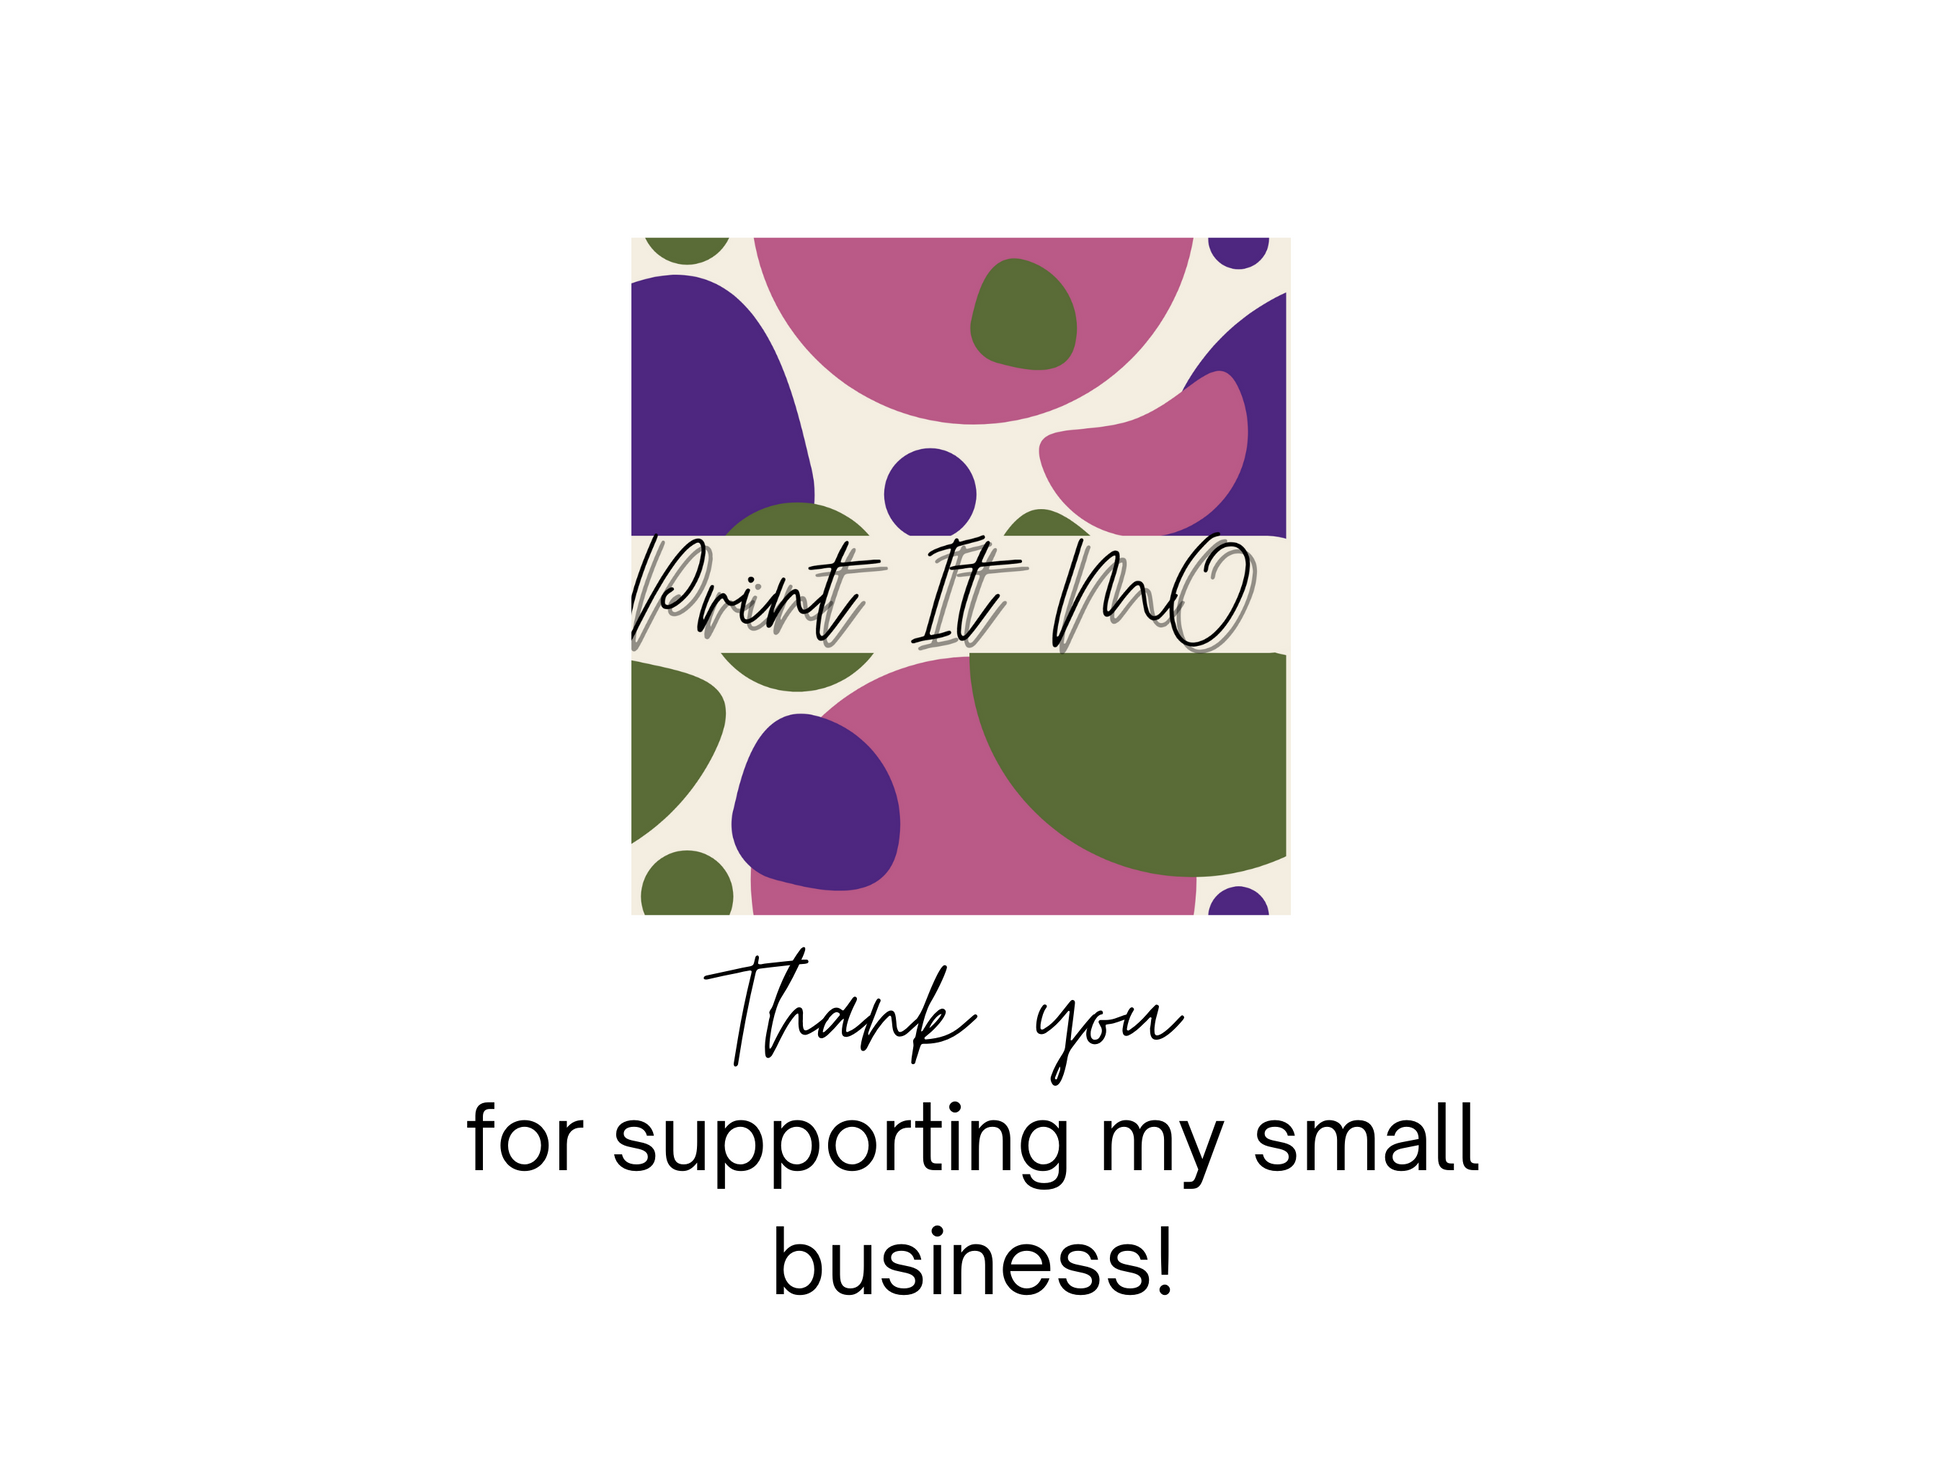 A thank you statement with the Print It Mo logo.